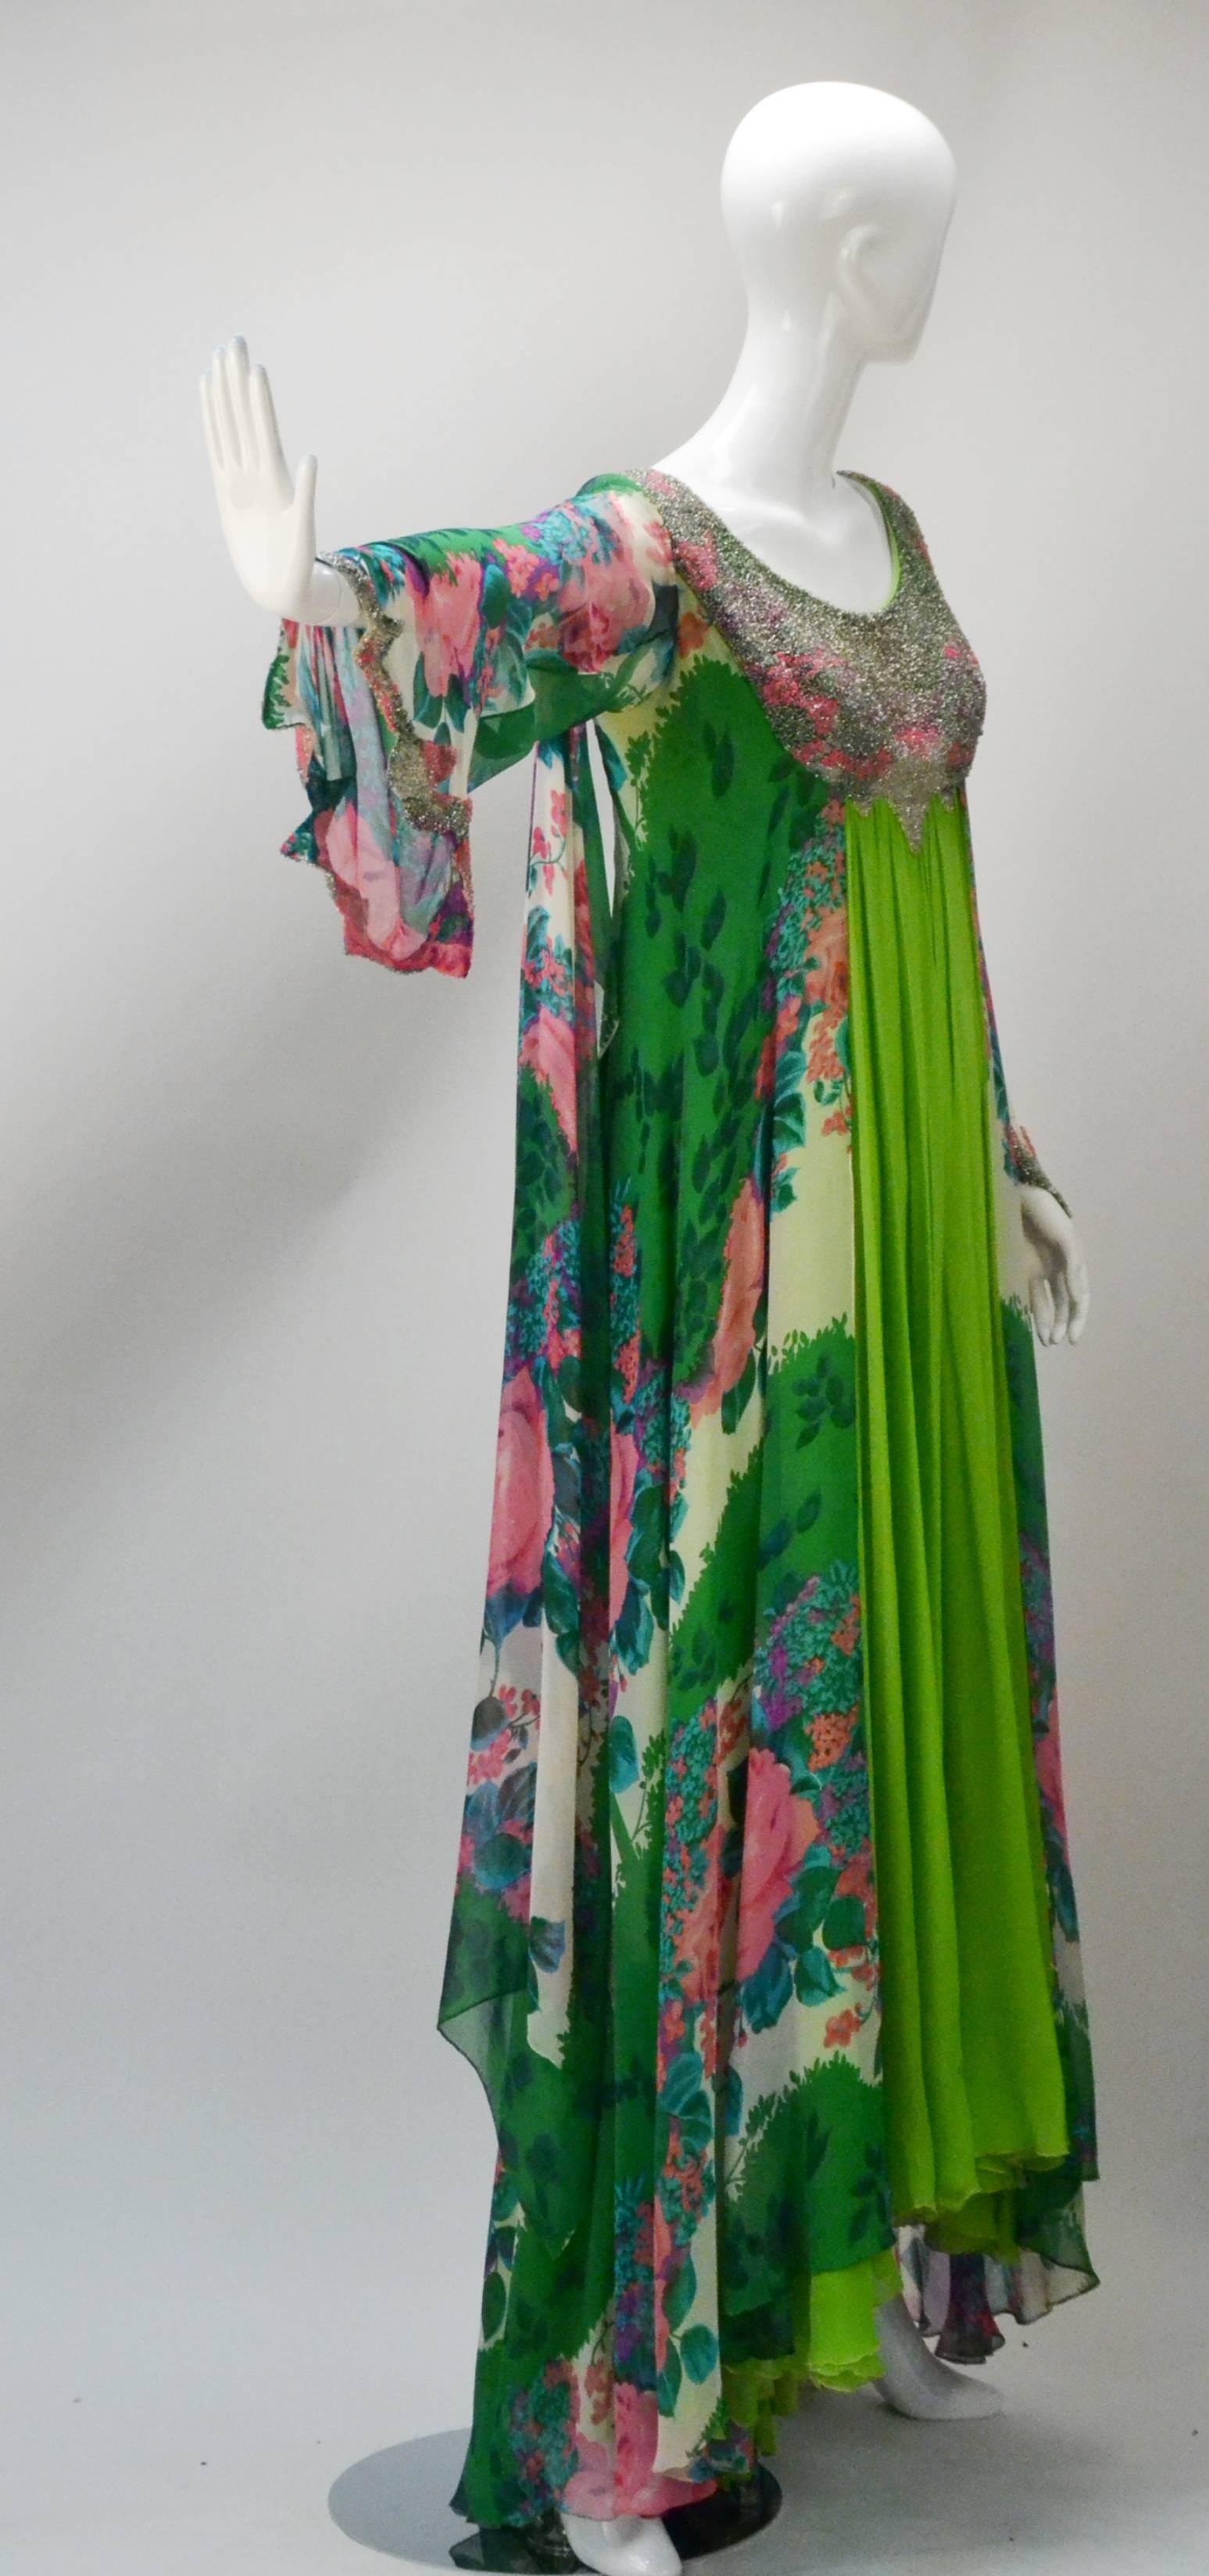 Channel your ethereal goddess wearing this jaw dropping floor length gown.

Gown is light in all but color (and weight) with its varying hues of green and pink and floral patterning in those colors as well.  The massive hand beadwork beaded in